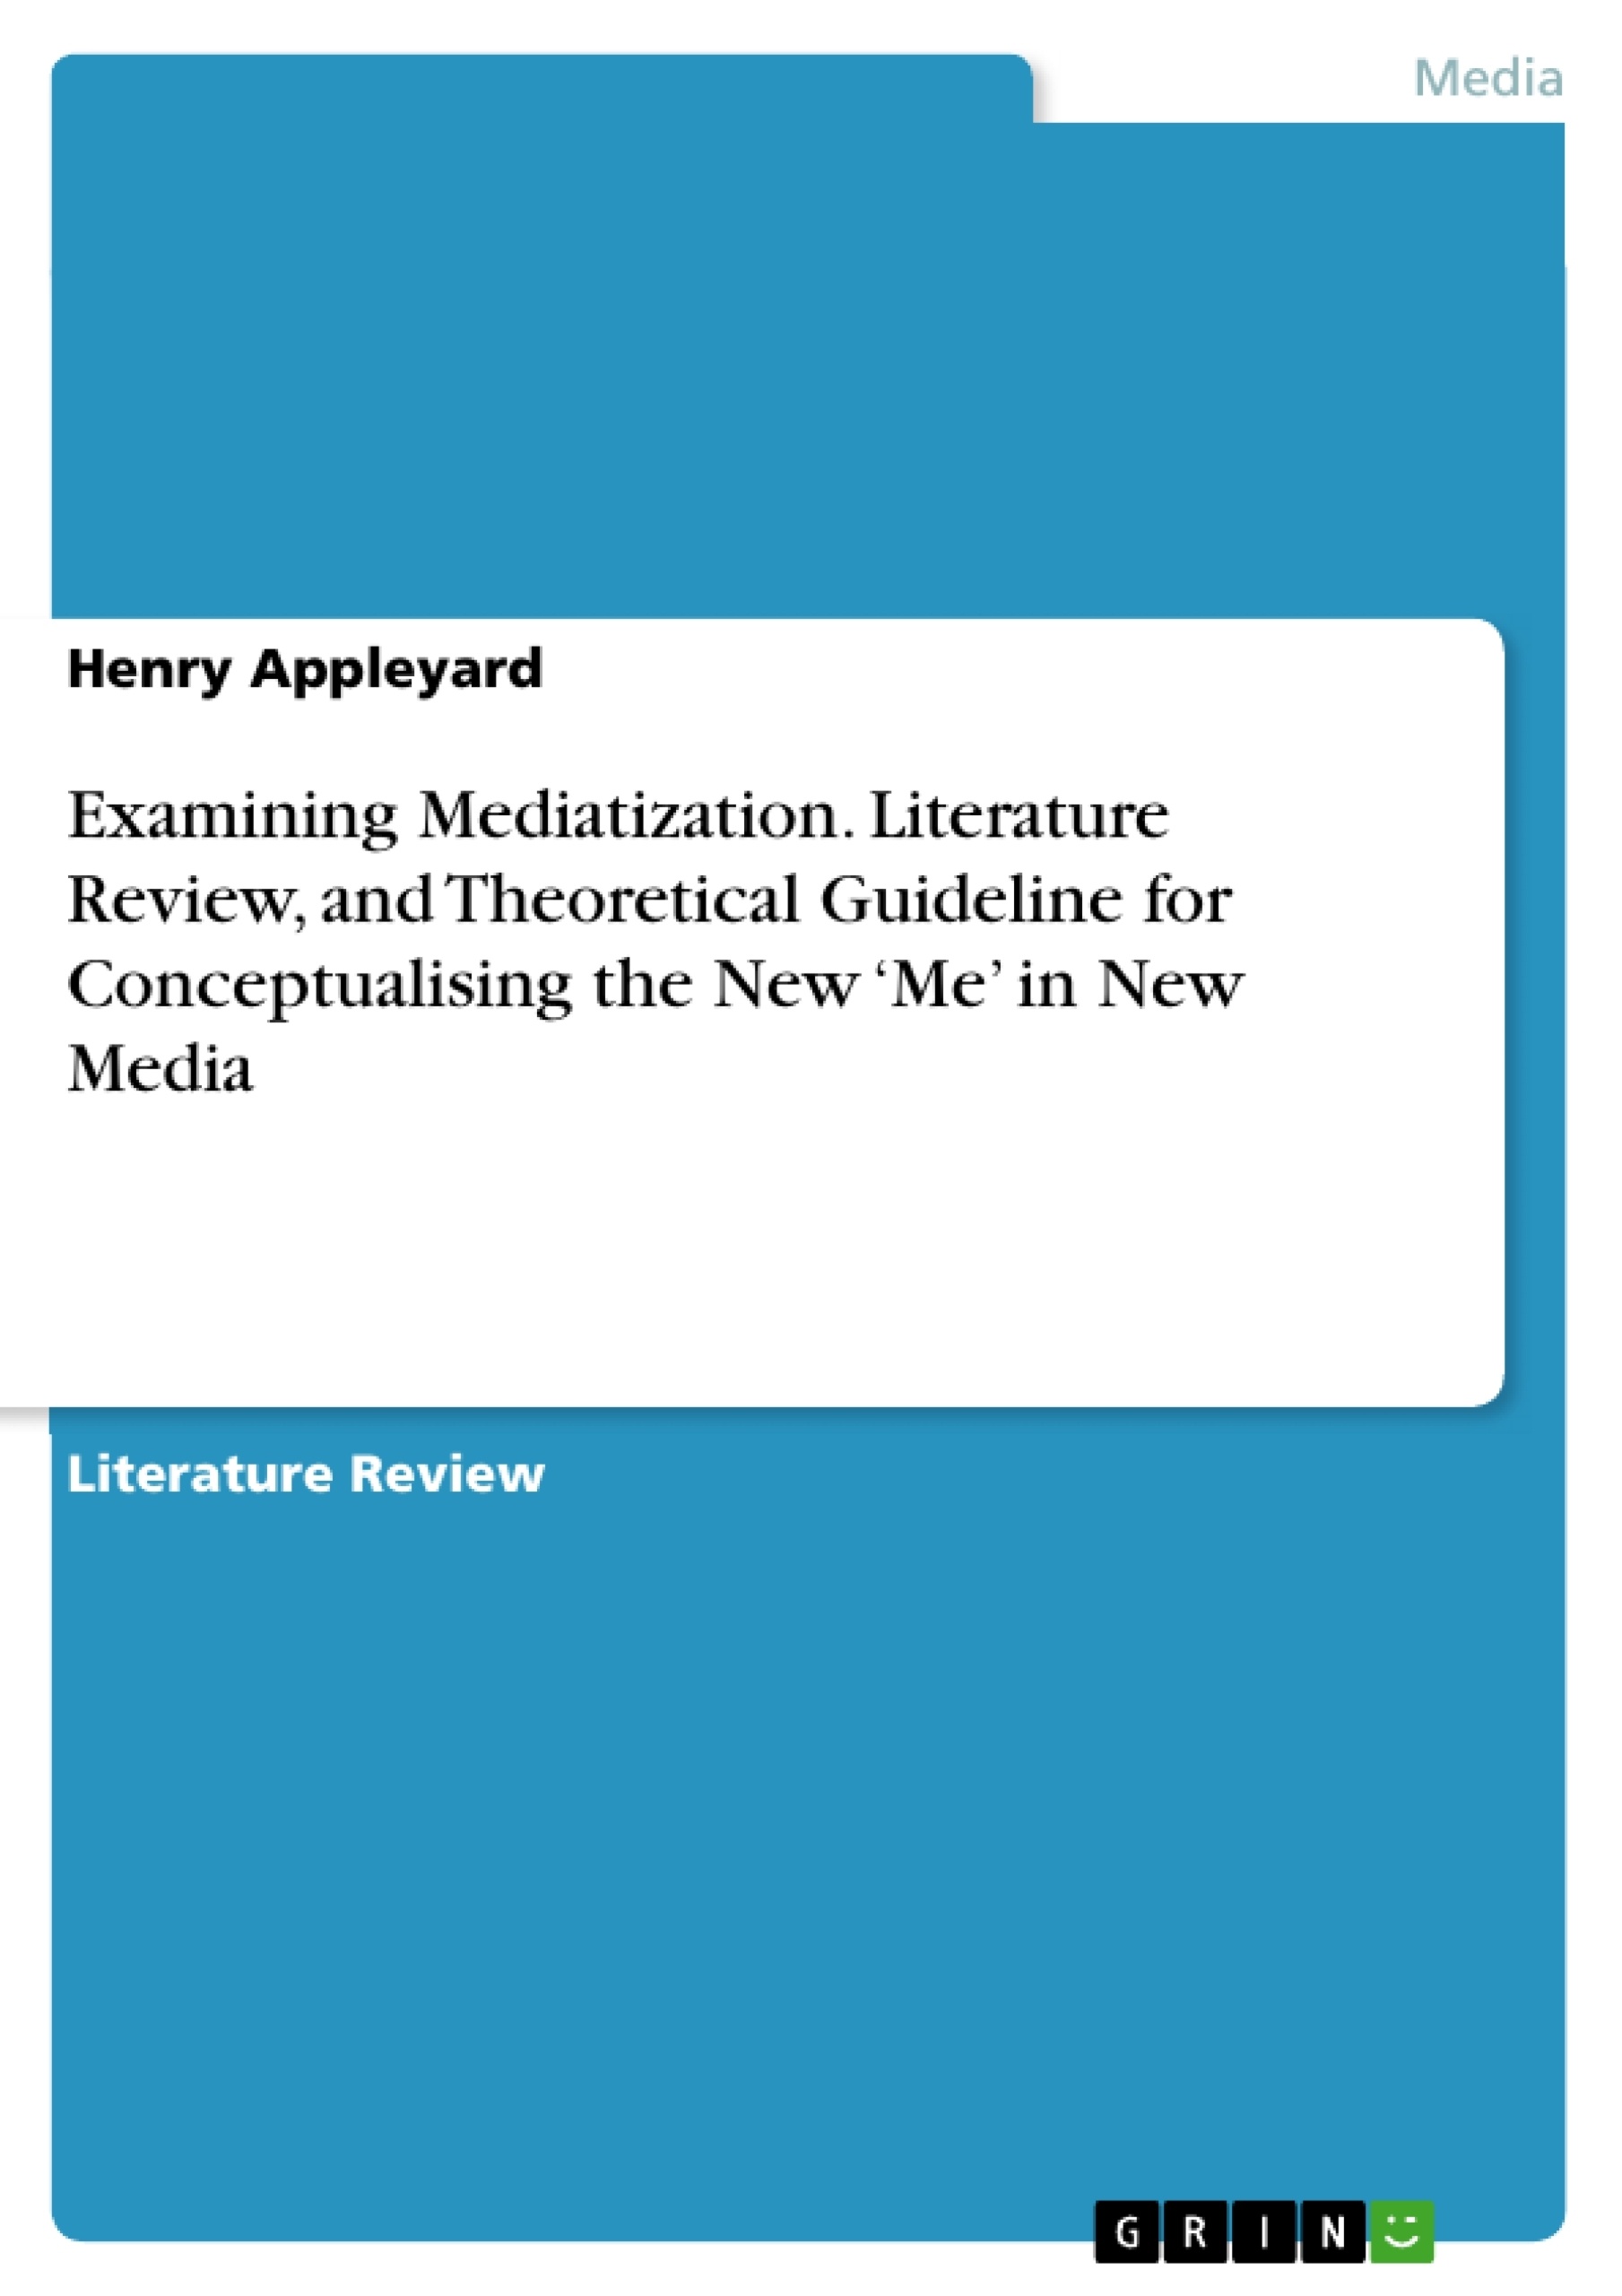 Titel: Examining Mediatization. Literature Review, and Theoretical Guideline for Conceptualising the New ‘Me’ in New Media